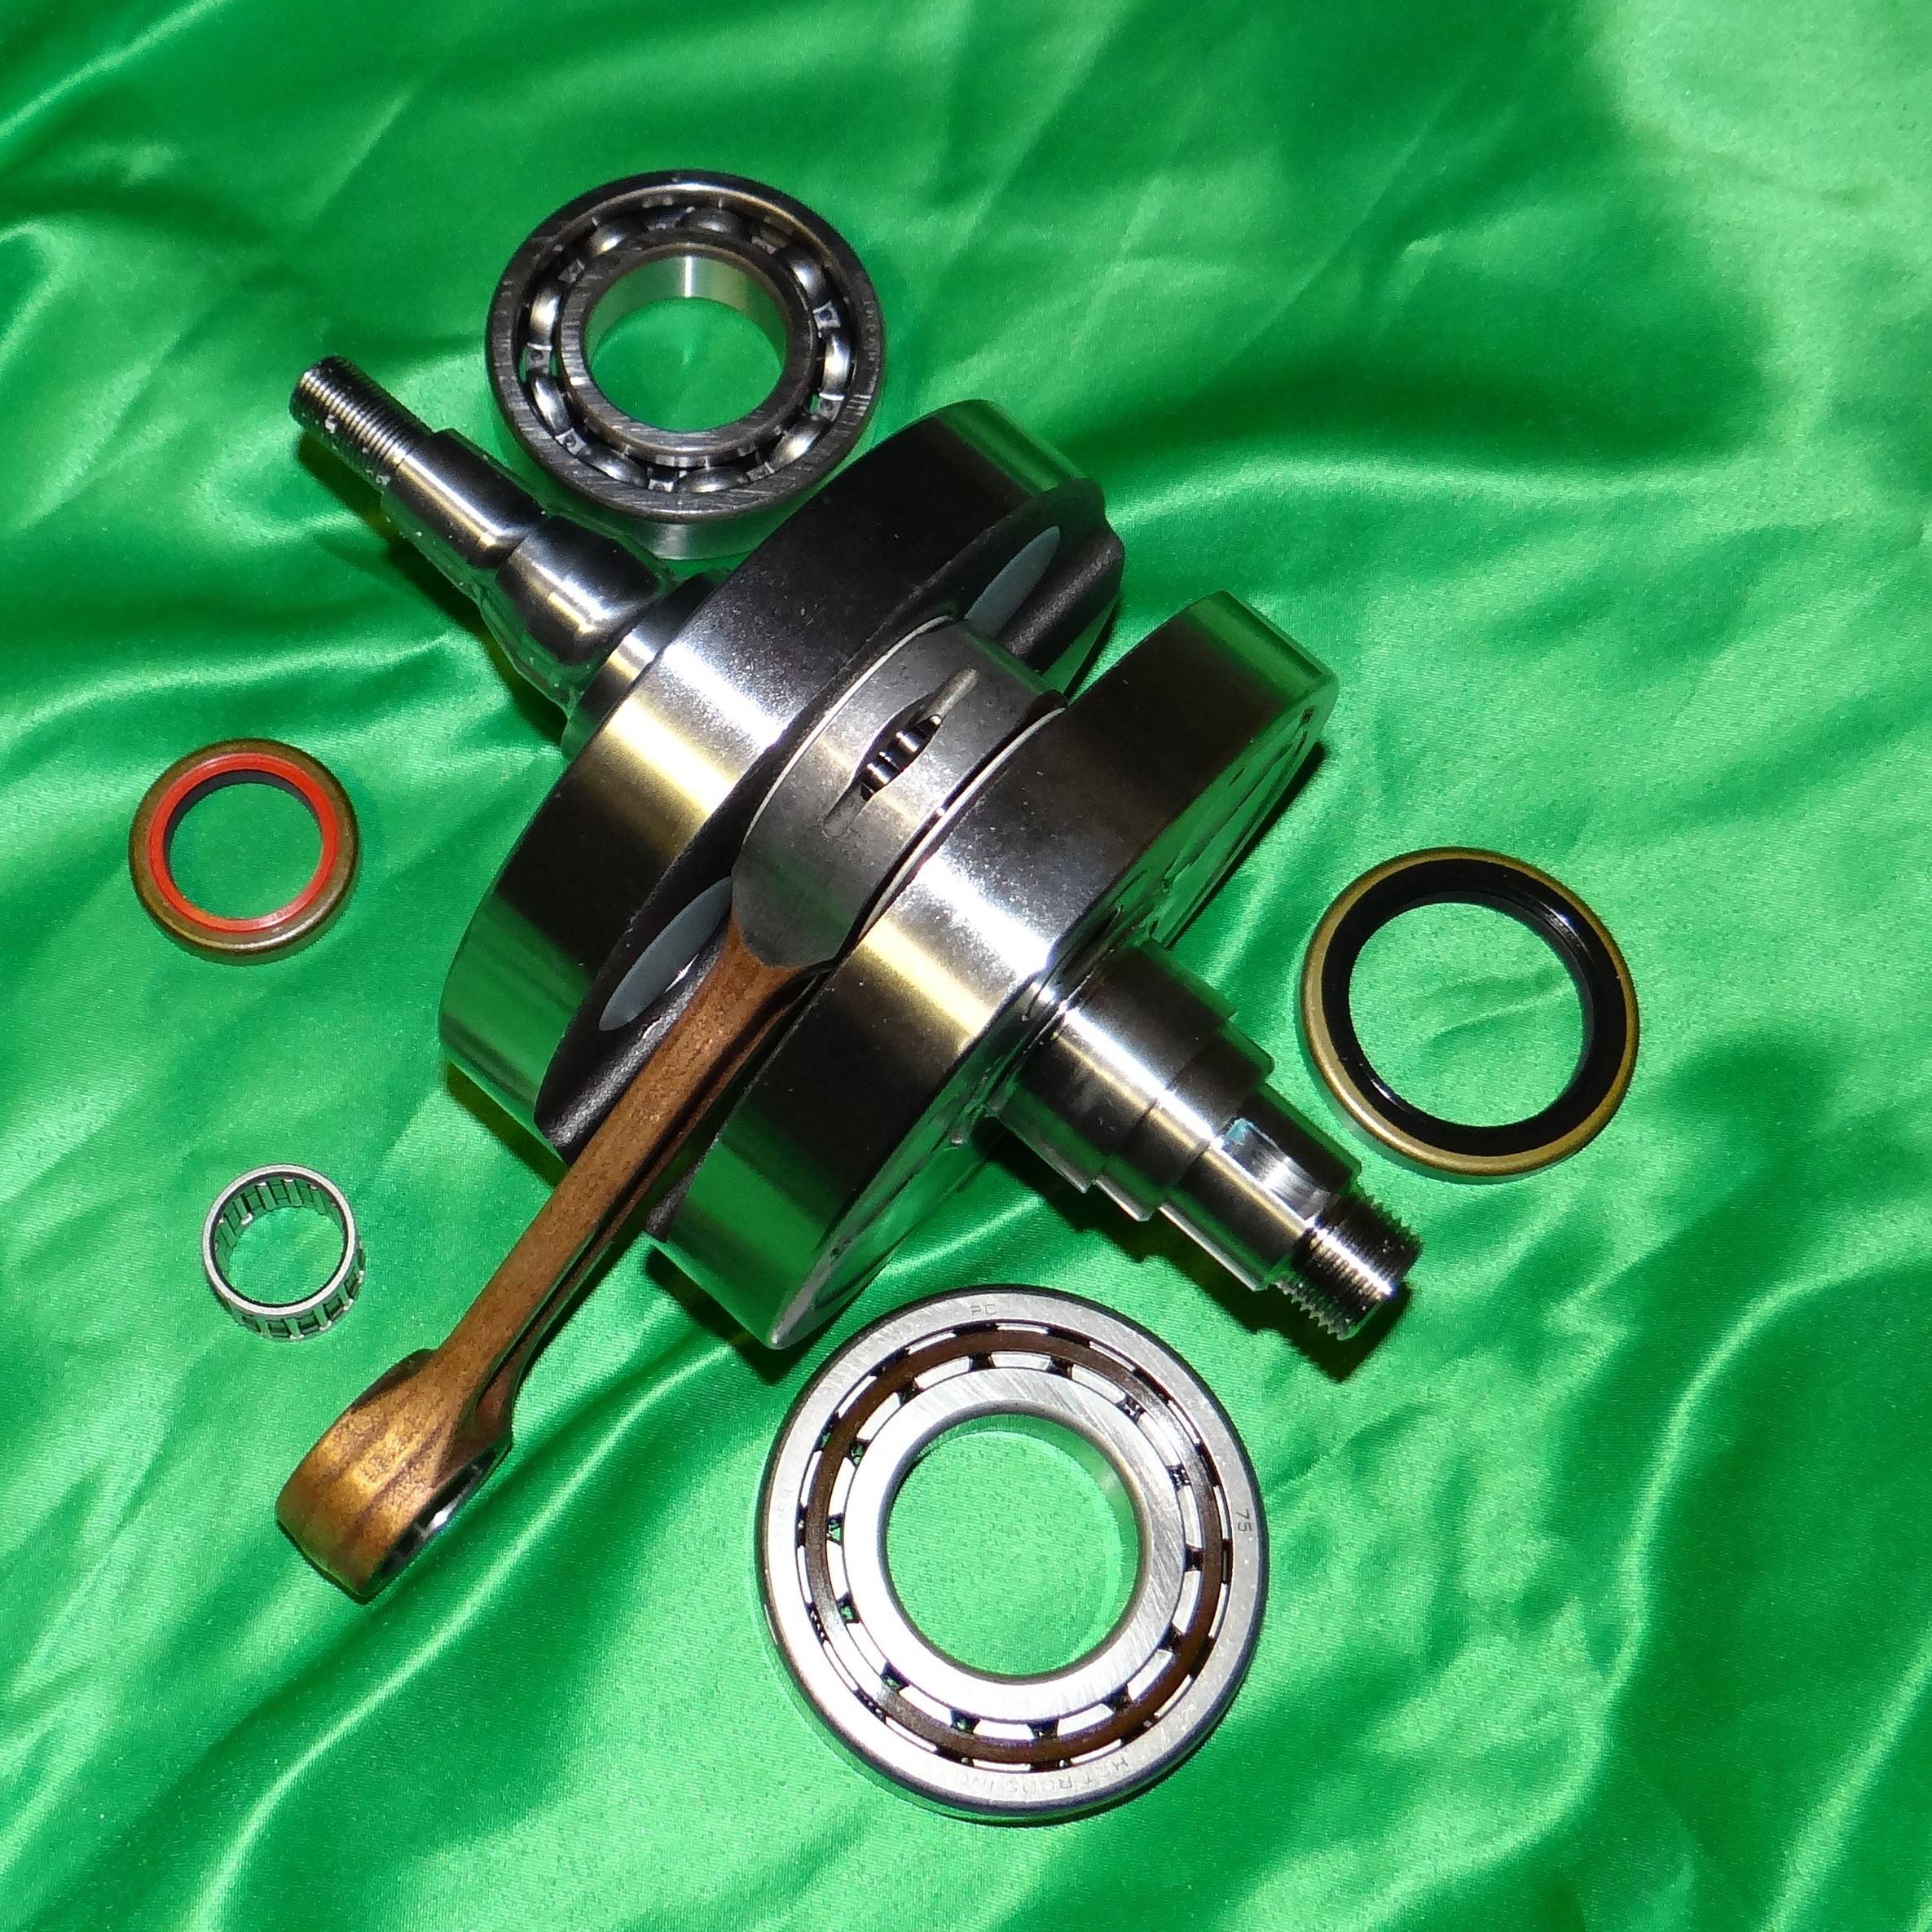 Crankshaft, crankcase, bearing, connecting rod and needle cage for GAS GAS 2 stroke